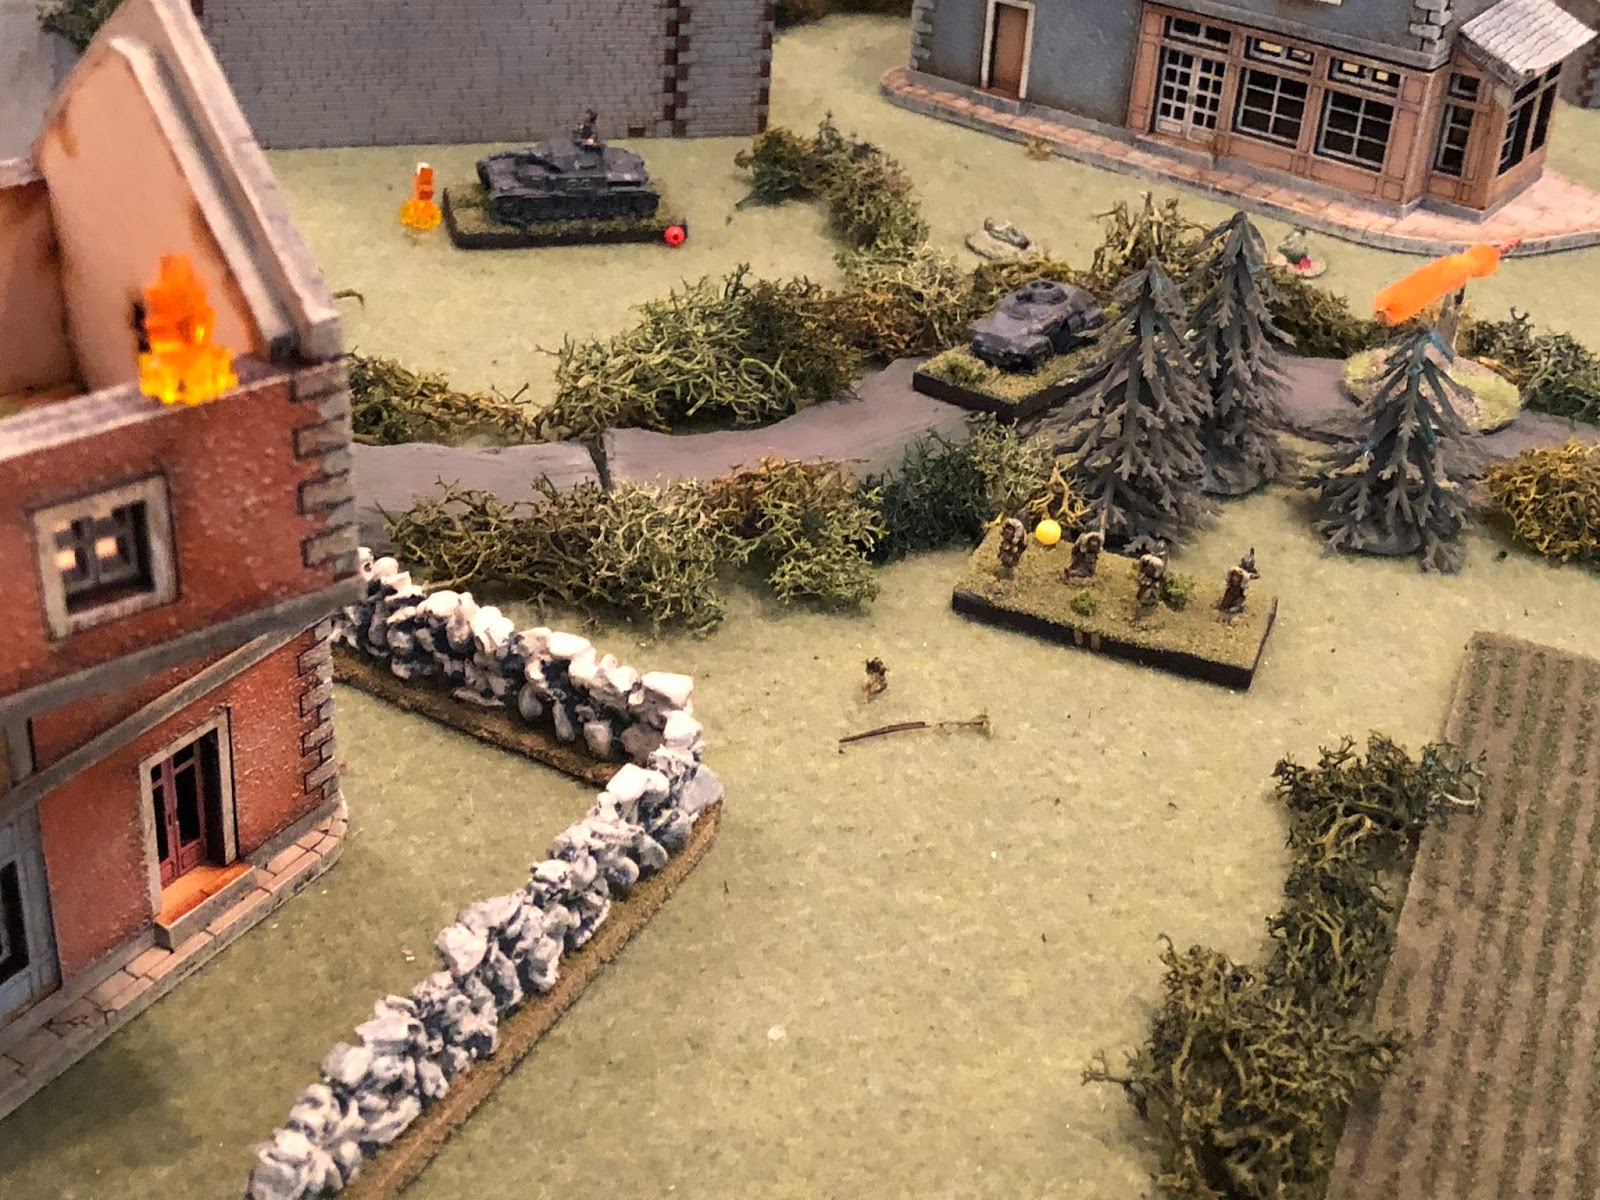  When the French tank round skipped off of SSgt Mangold's Pz IV (top centre) it made a hell of a CLANG!, drawing Cpl Edsts's attention (centre top right, on the road), distracting him long enough for the French 2nd Platoon squad at ground level to ho